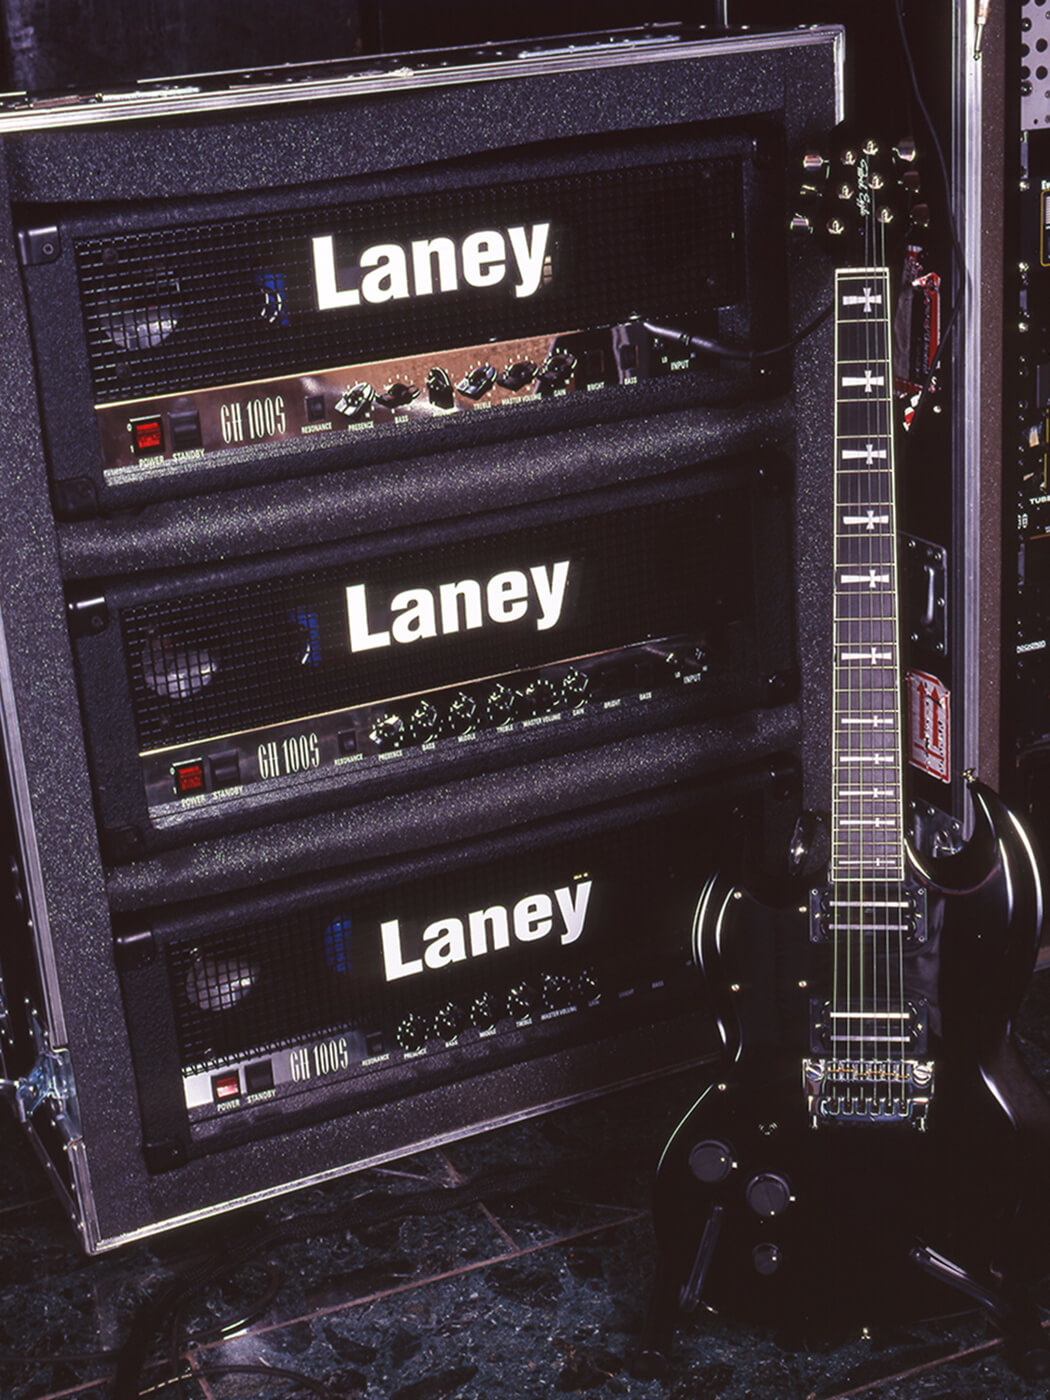 Tony Iommi’s guitar and Laney amplifier rig in 1995, photo by Richard Ecclestone/Redferns via Getty Images